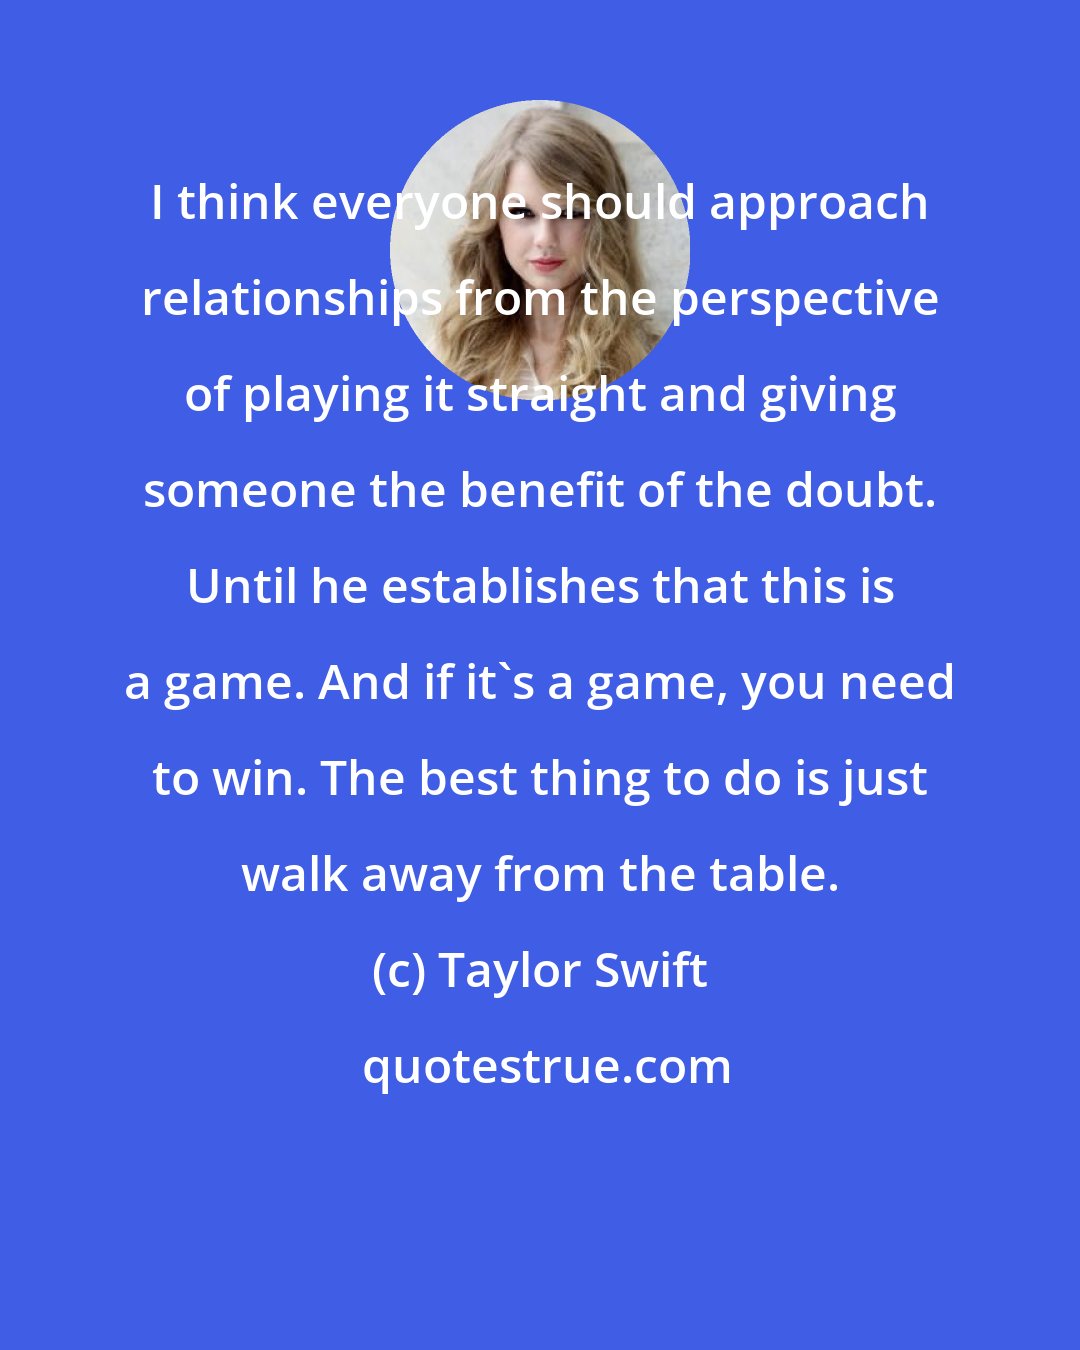 Taylor Swift: I think everyone should approach relationships from the perspective of playing it straight and giving someone the benefit of the doubt. Until he establishes that this is a game. And if it's a game, you need to win. The best thing to do is just walk away from the table.